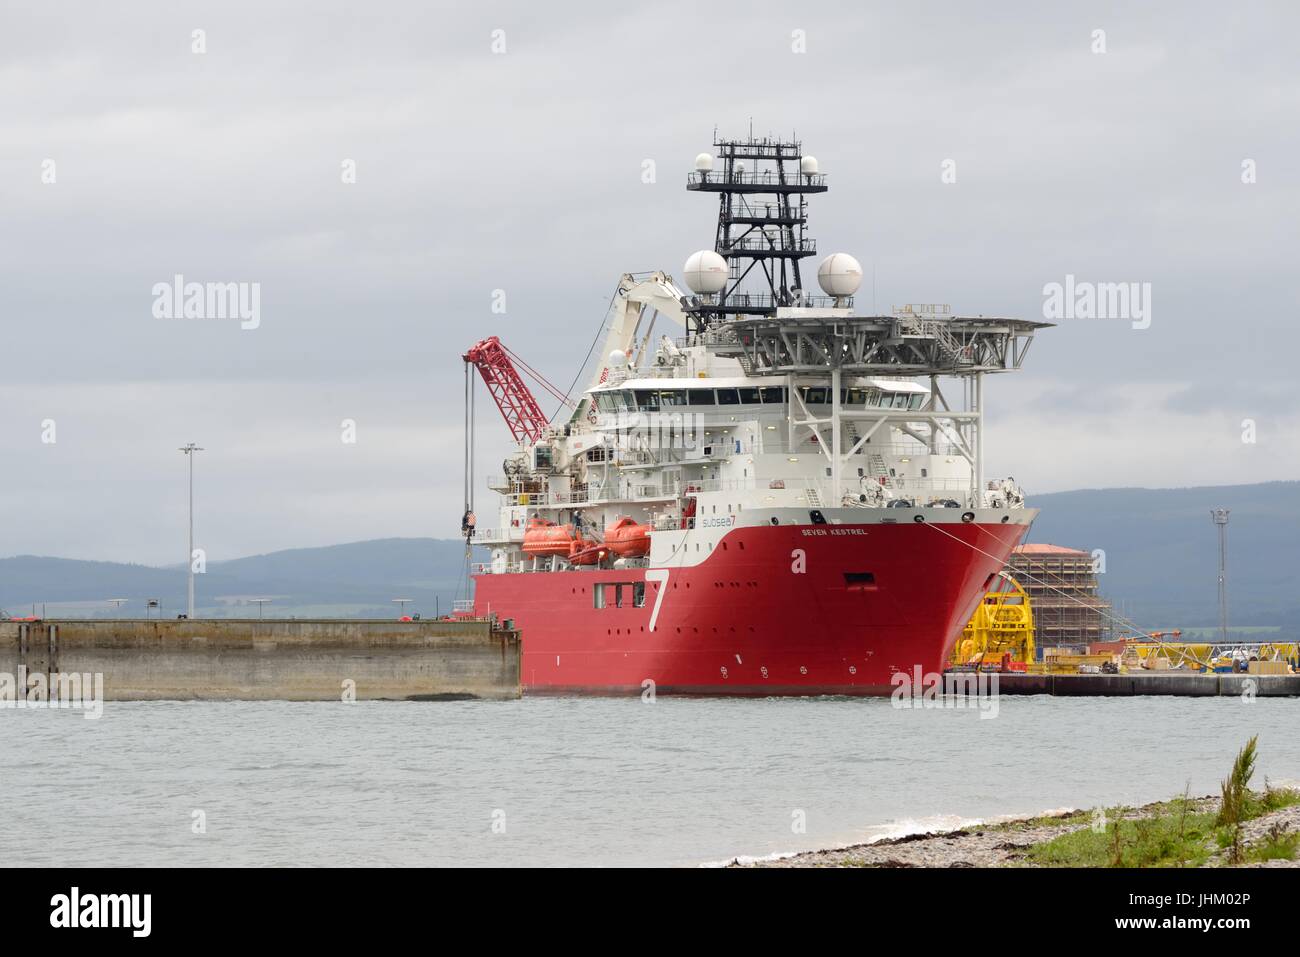 The diving vessel 'Seven Kestrel' docked at the port of Nigg on the Cromarty Firth, Easter Ross, Scotland, UK Stock Photo